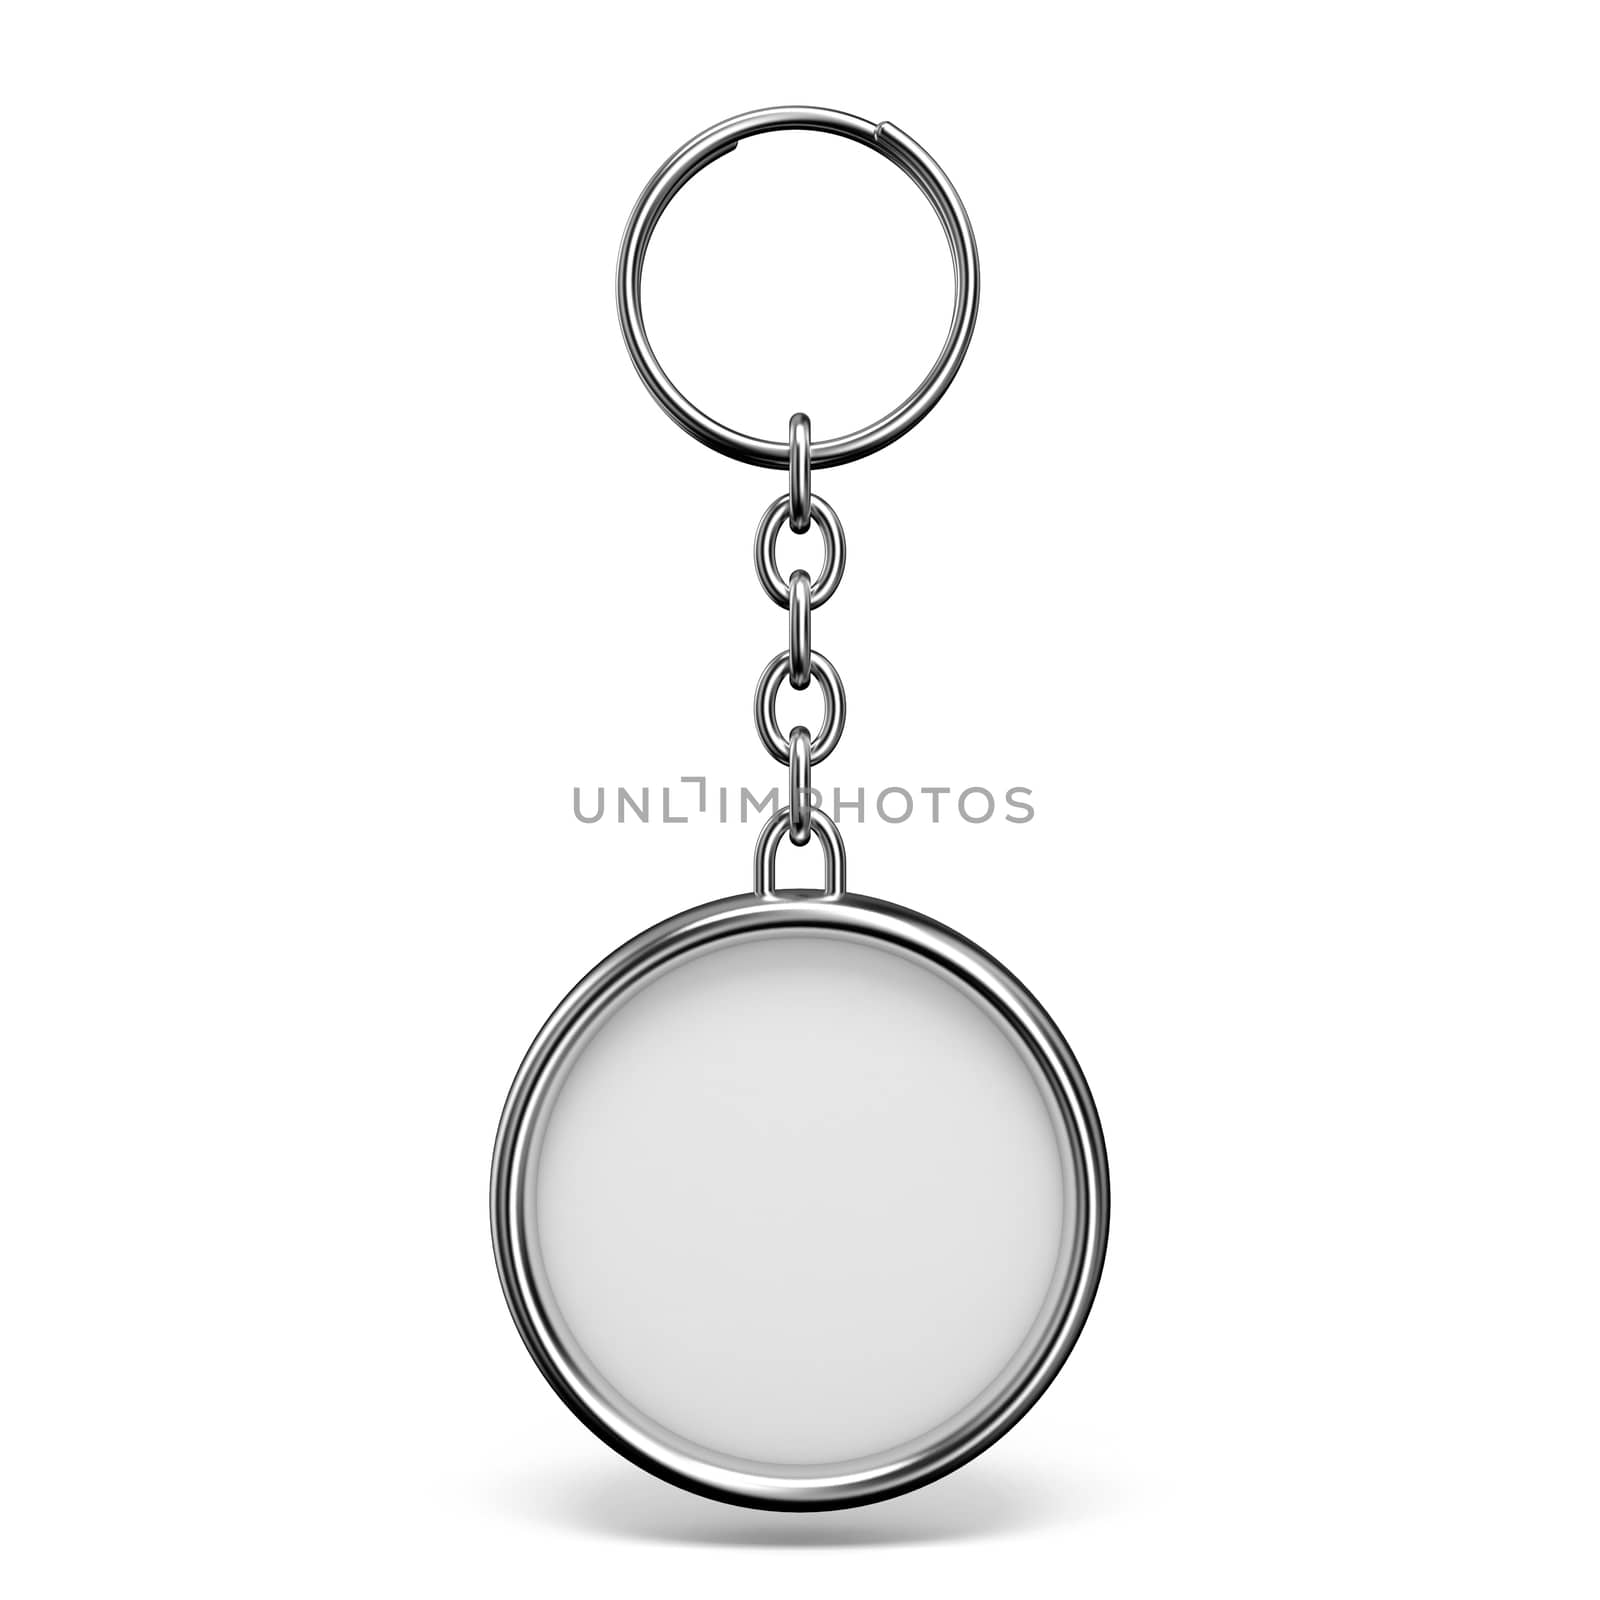 Blank metal trinket with a ring for a key circle shape 3D rendering illustration isolated on white background